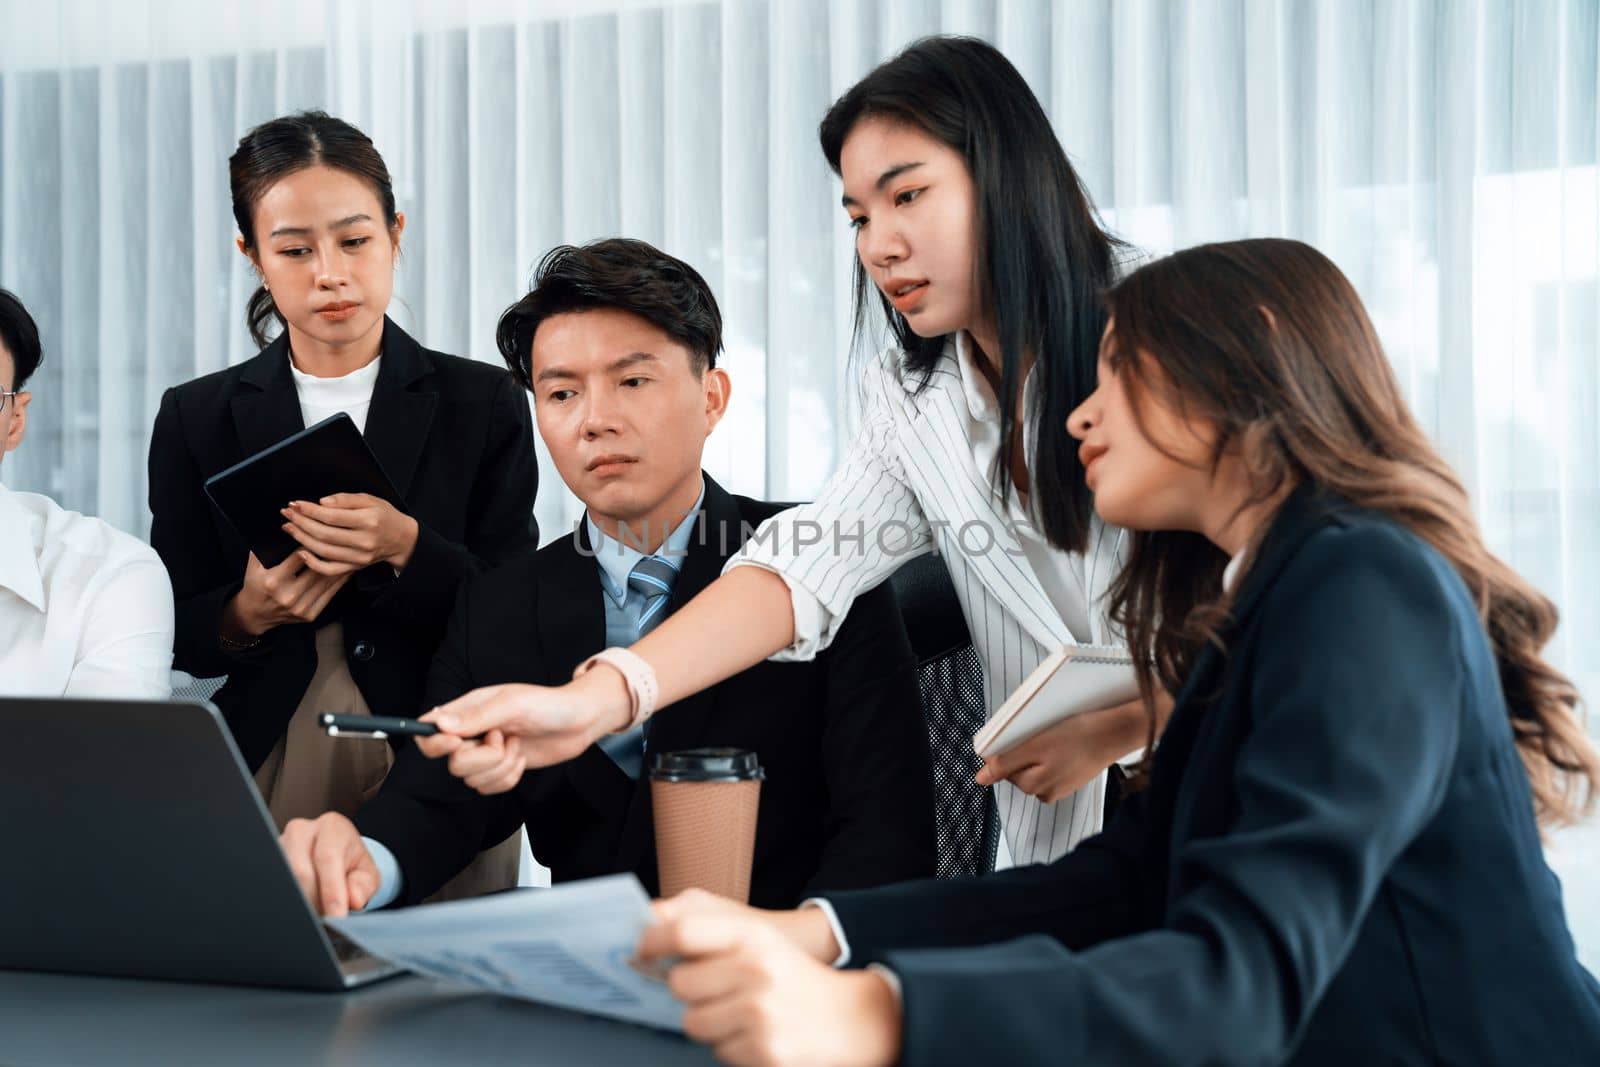 Harmony in office concept as business people analyzing dashboard paper together in workplace. Young colleagues give ideas at manager desk for discussion or strategy planning about project.